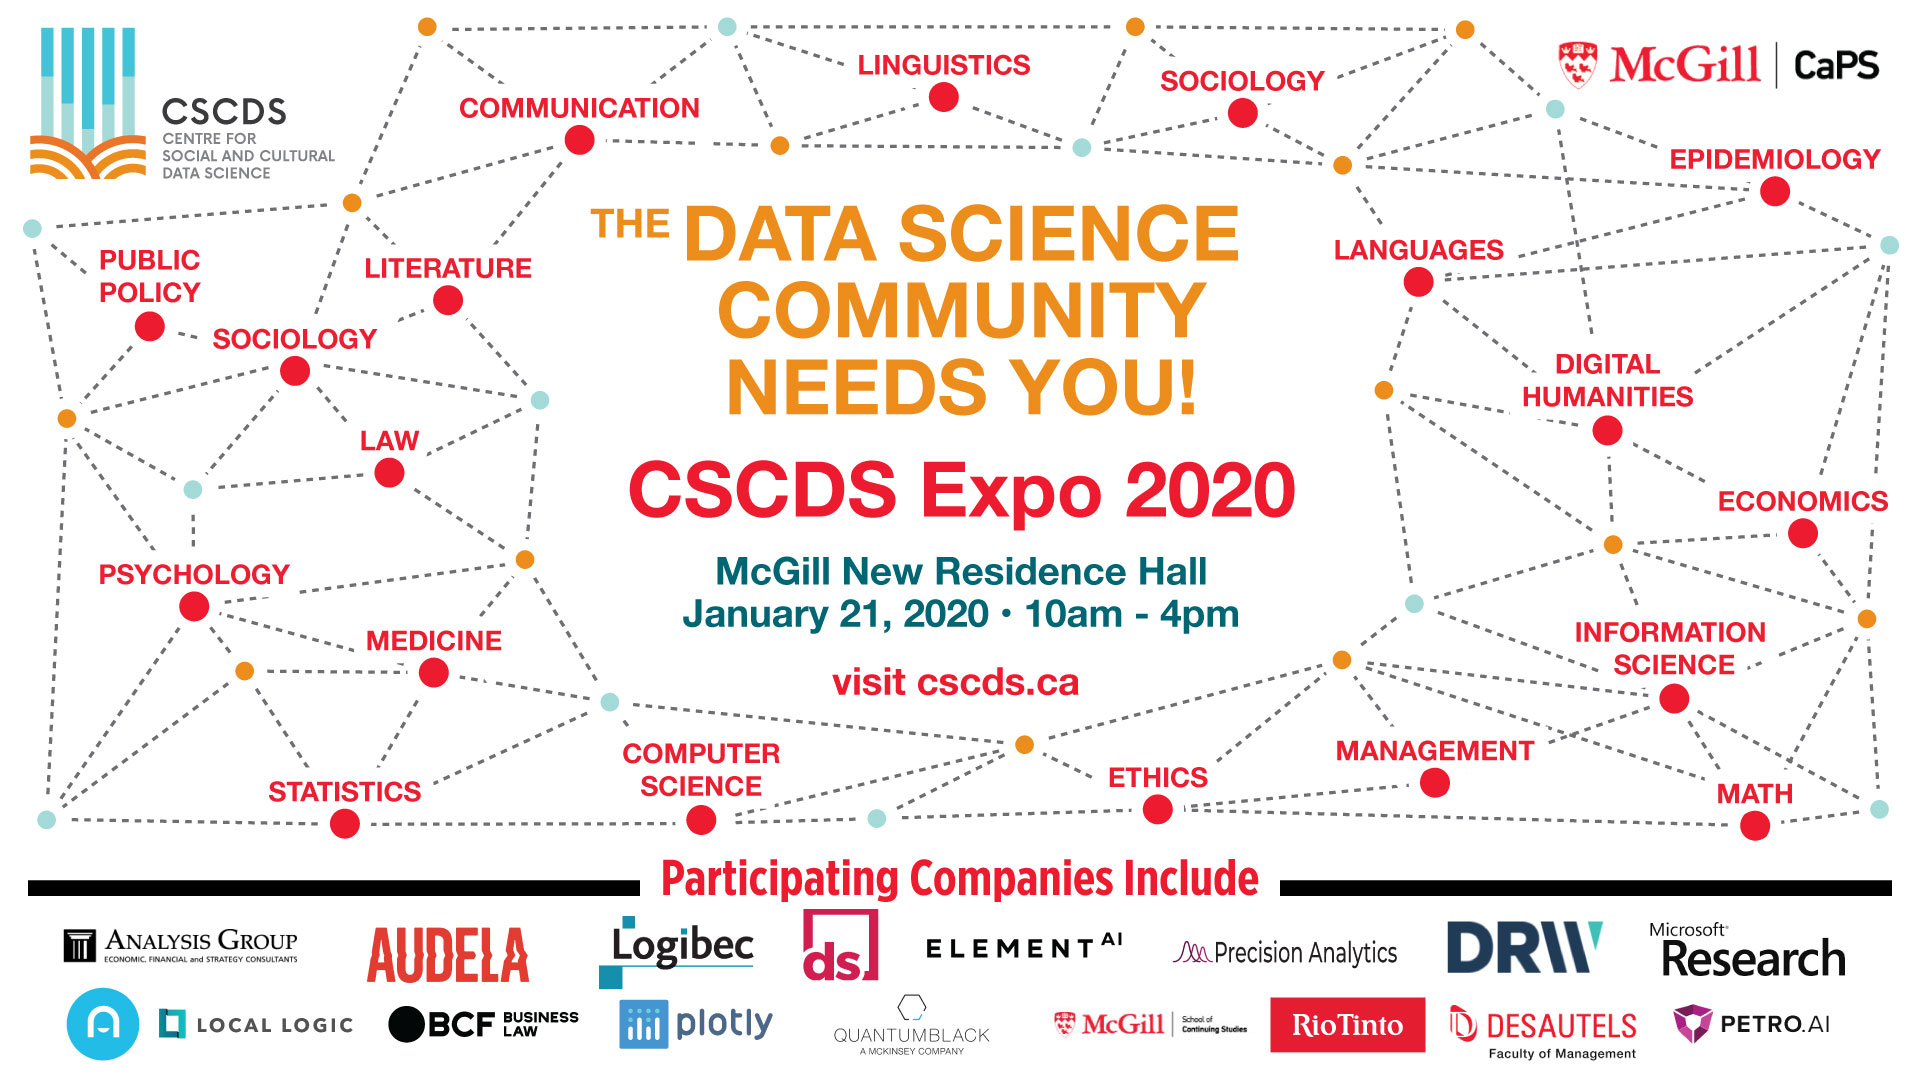 CSCDS Data Science Community Expo